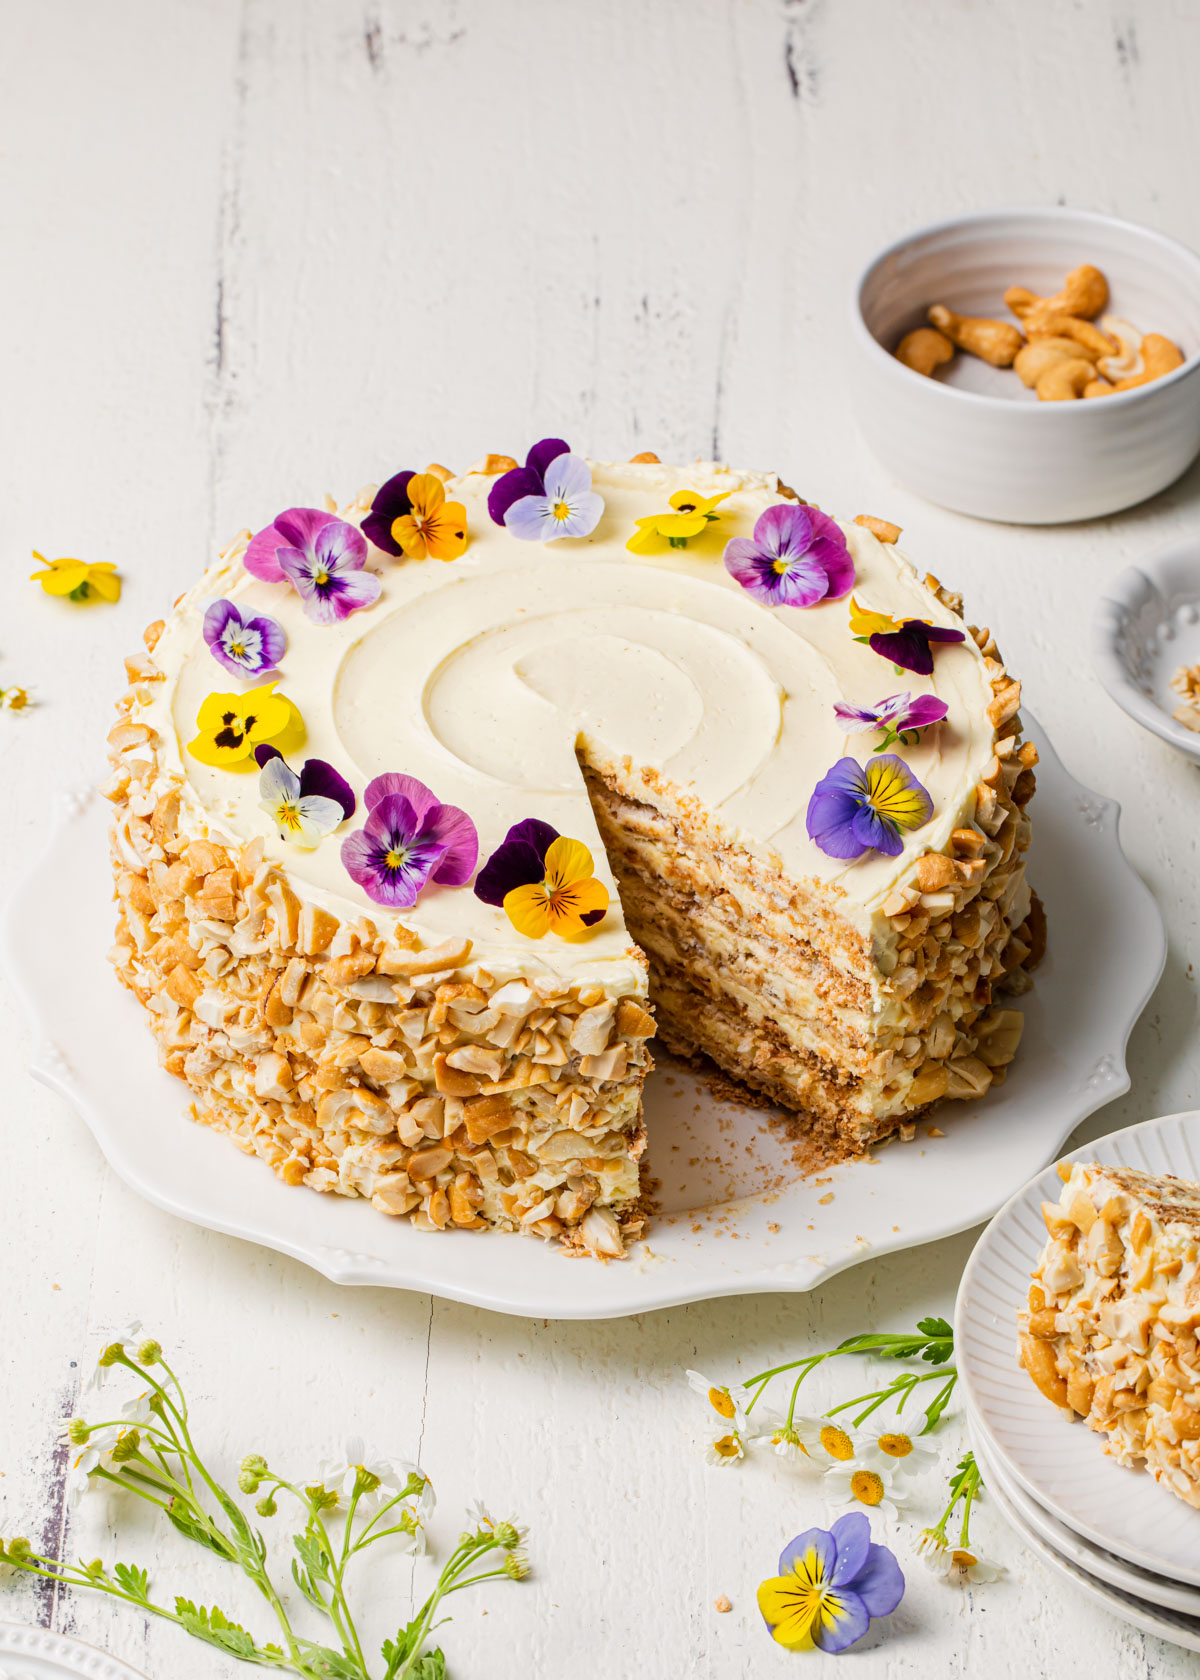 A layered cashew and meringue Sans Rival Cake that's been sliced and served on a white platter